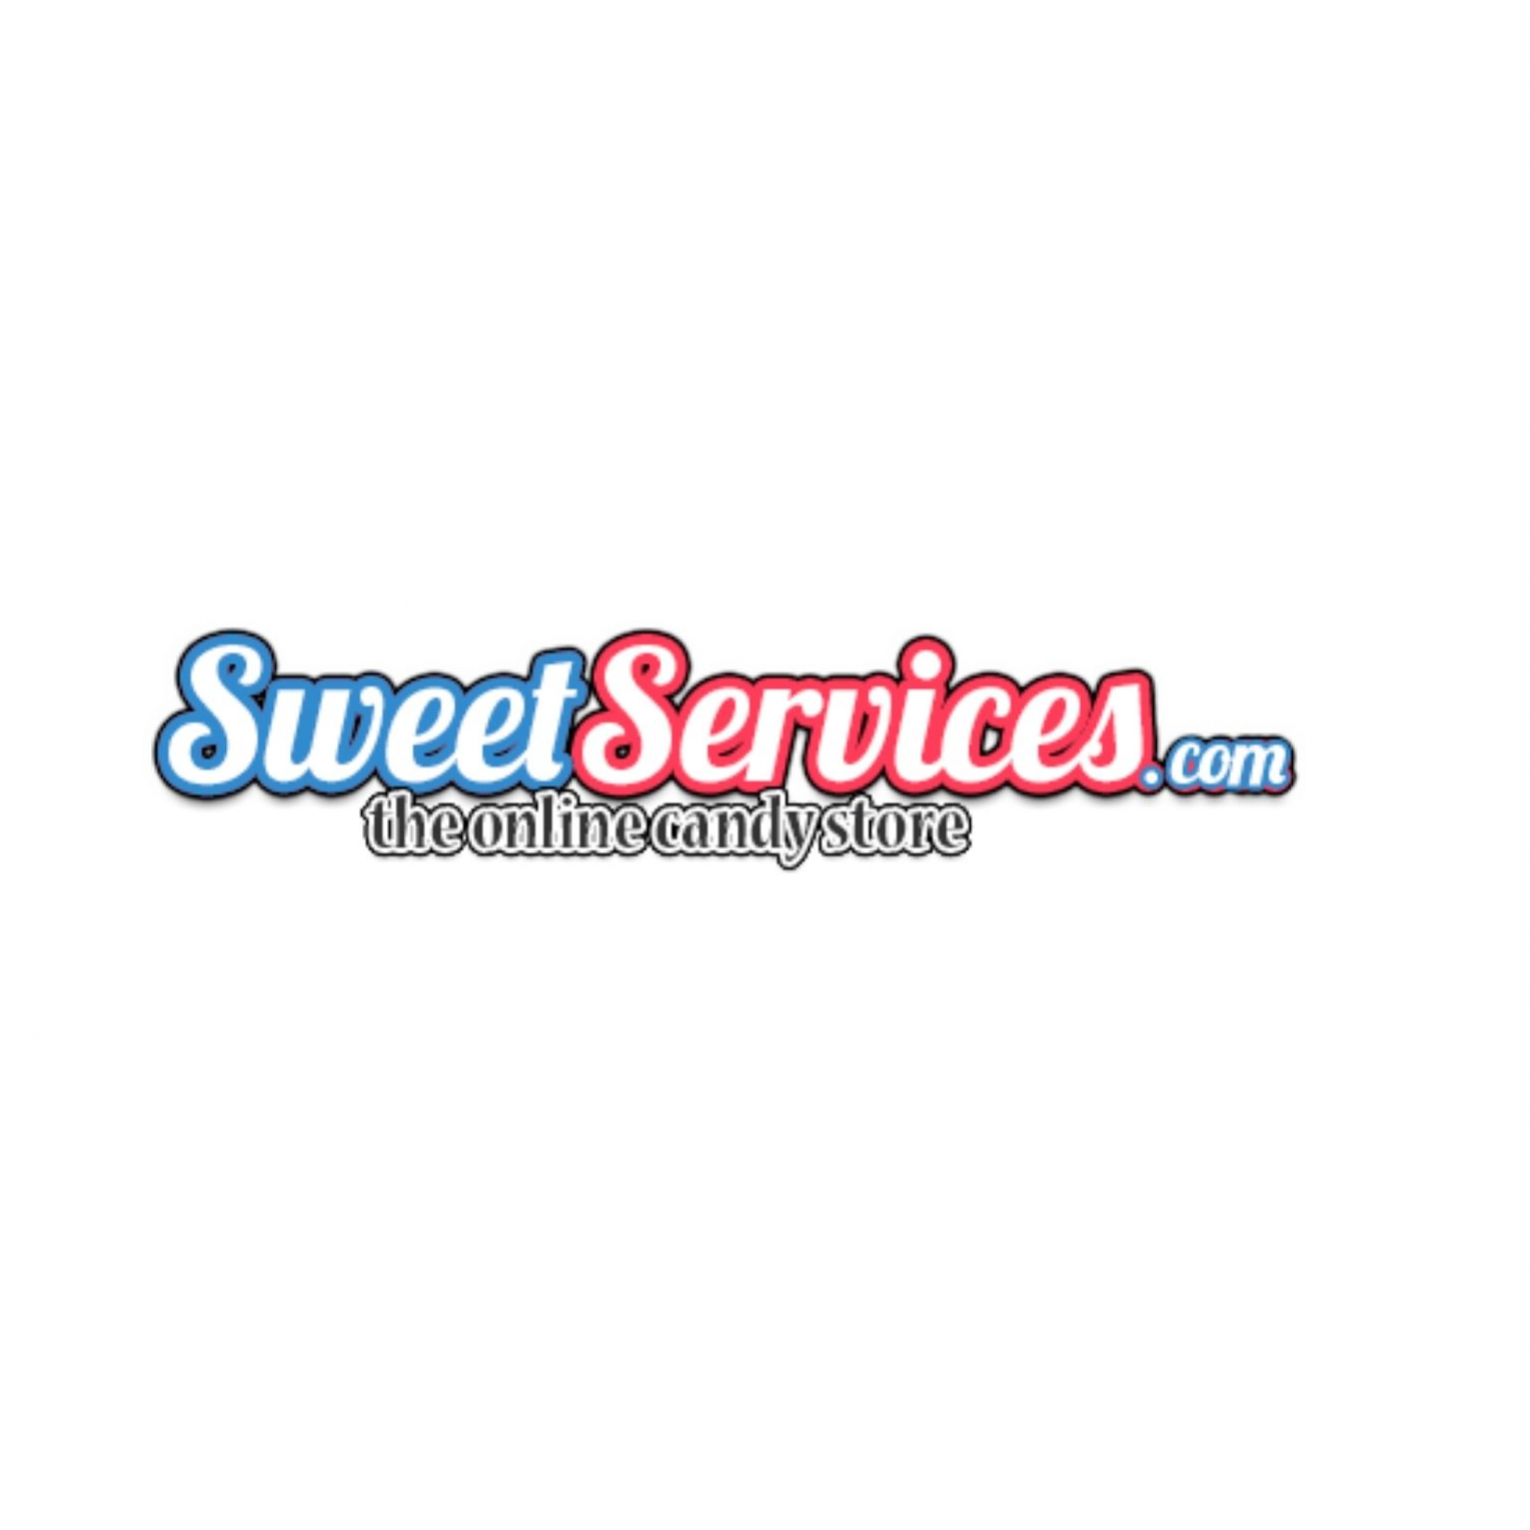 SweetServices01